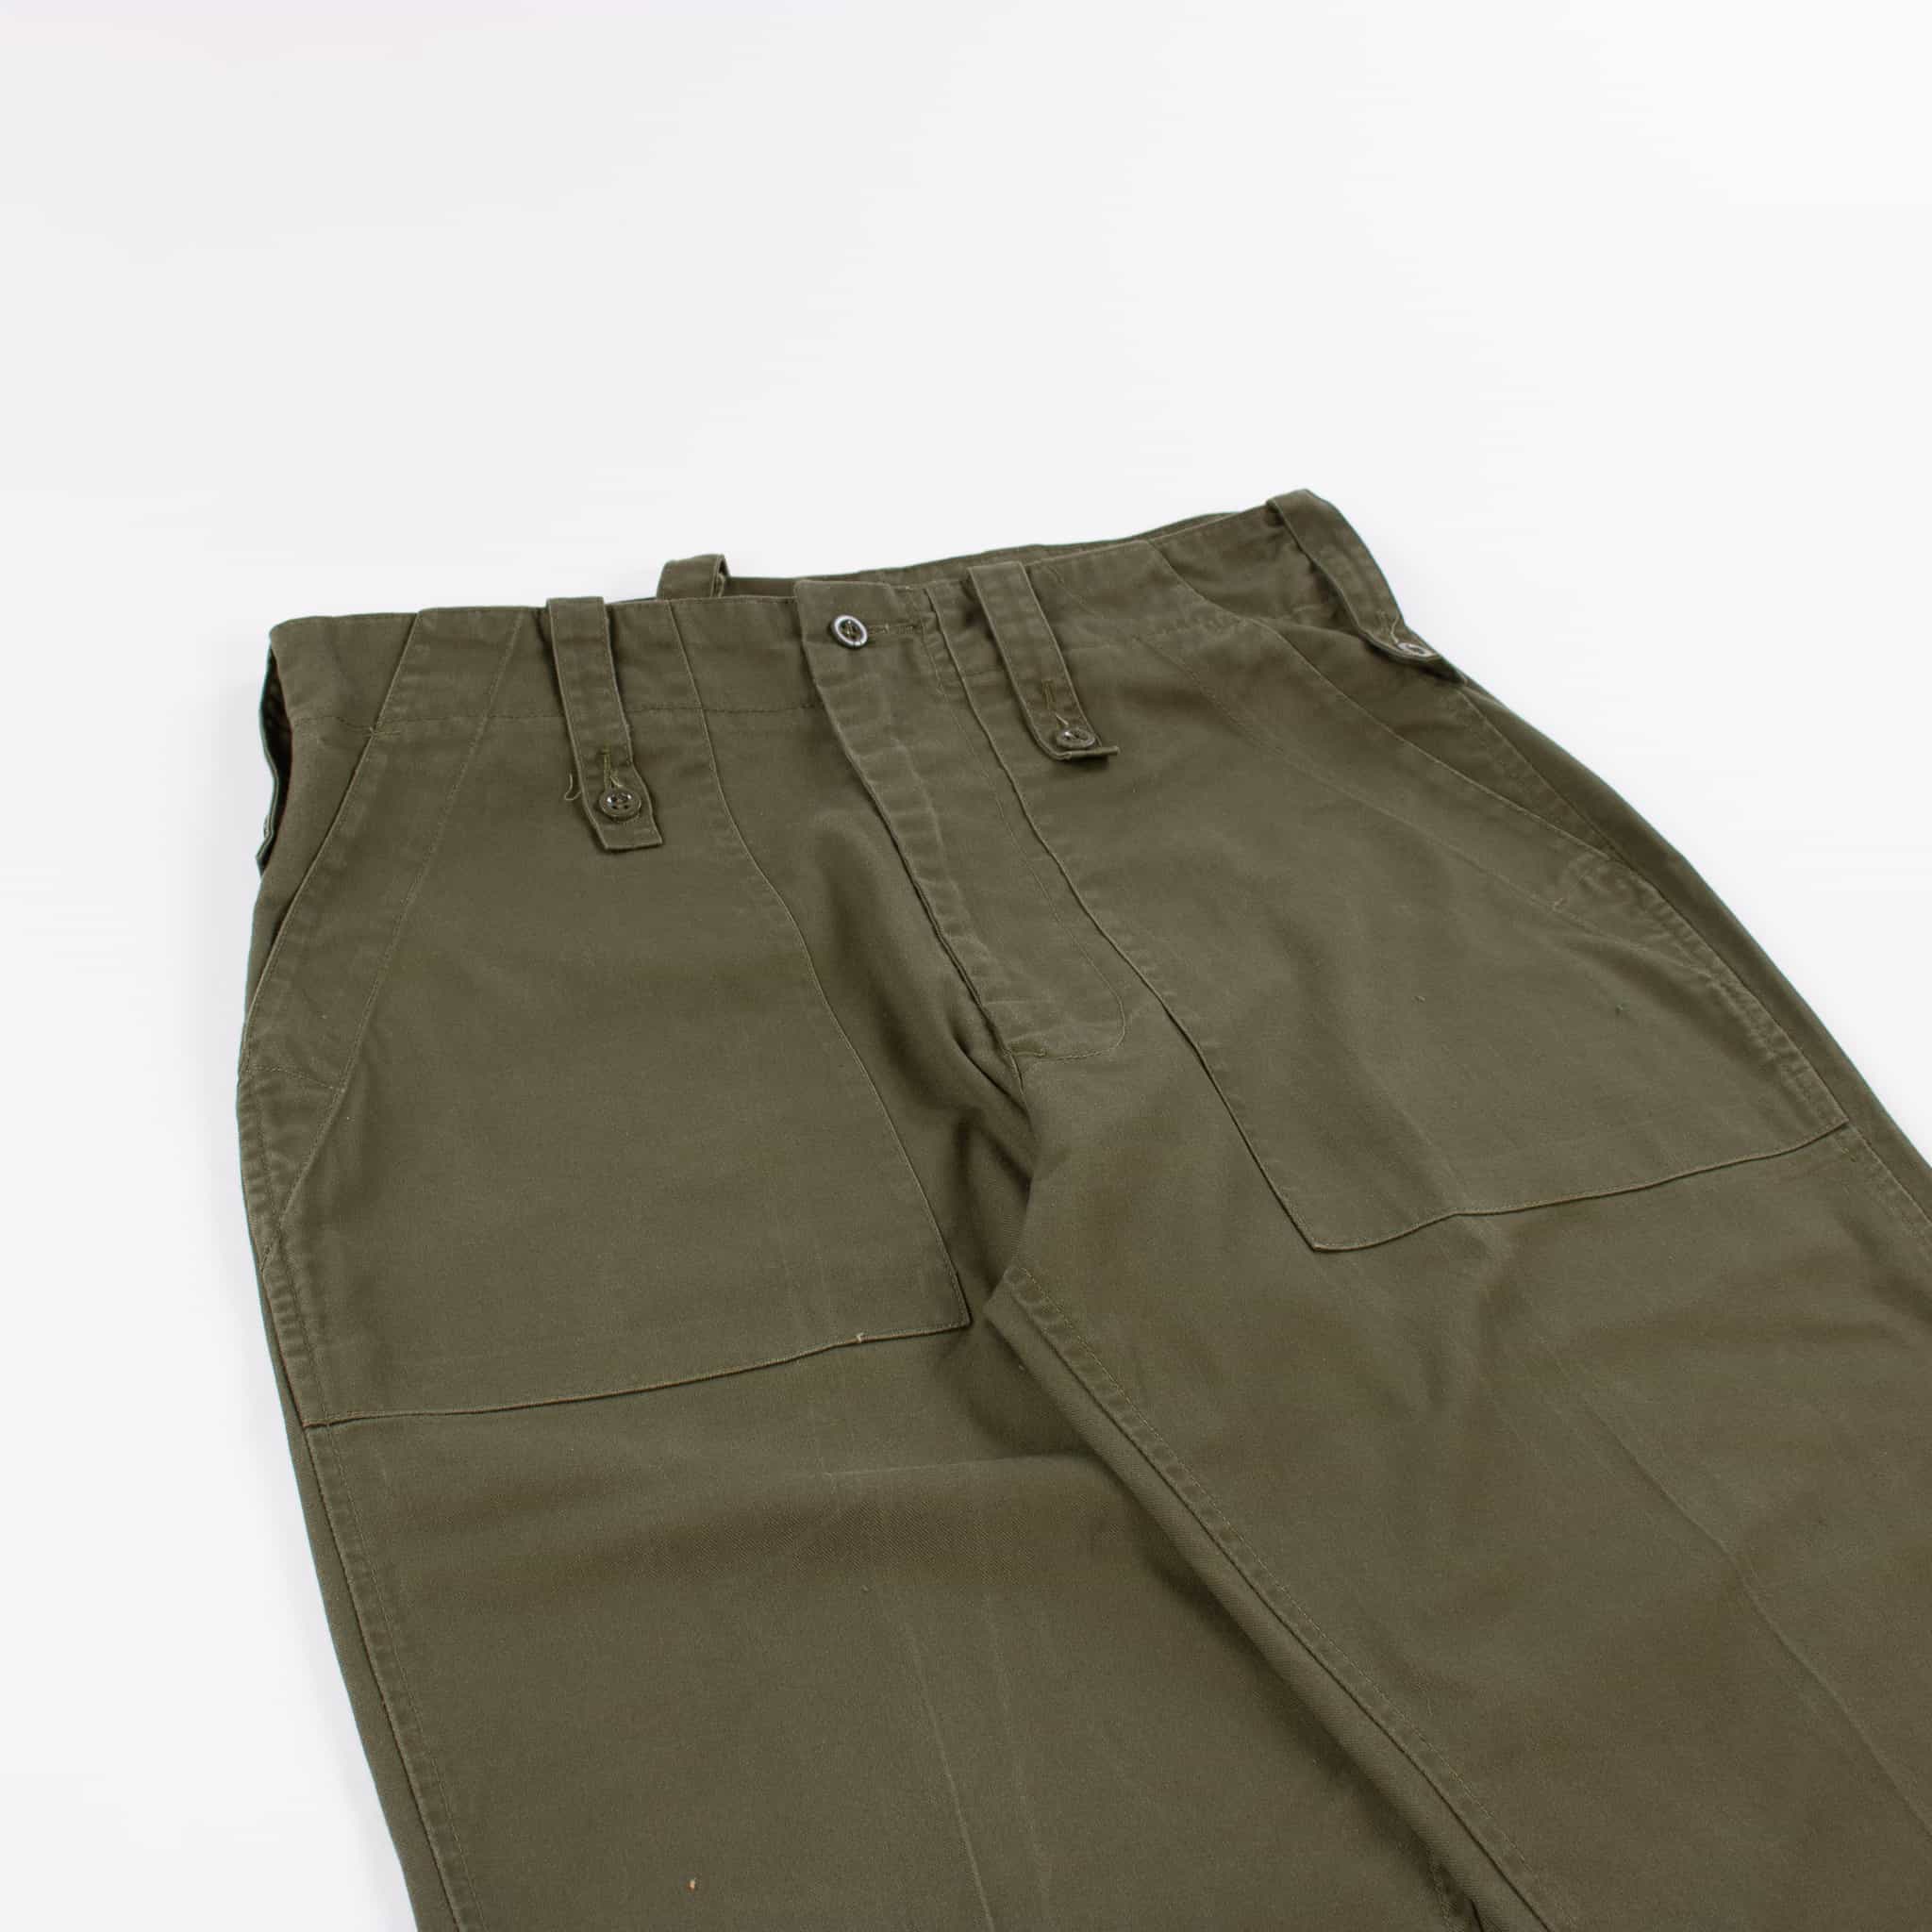 Vintage British Army Olive Green Fatigue Trousers 1960s-70s | American ...